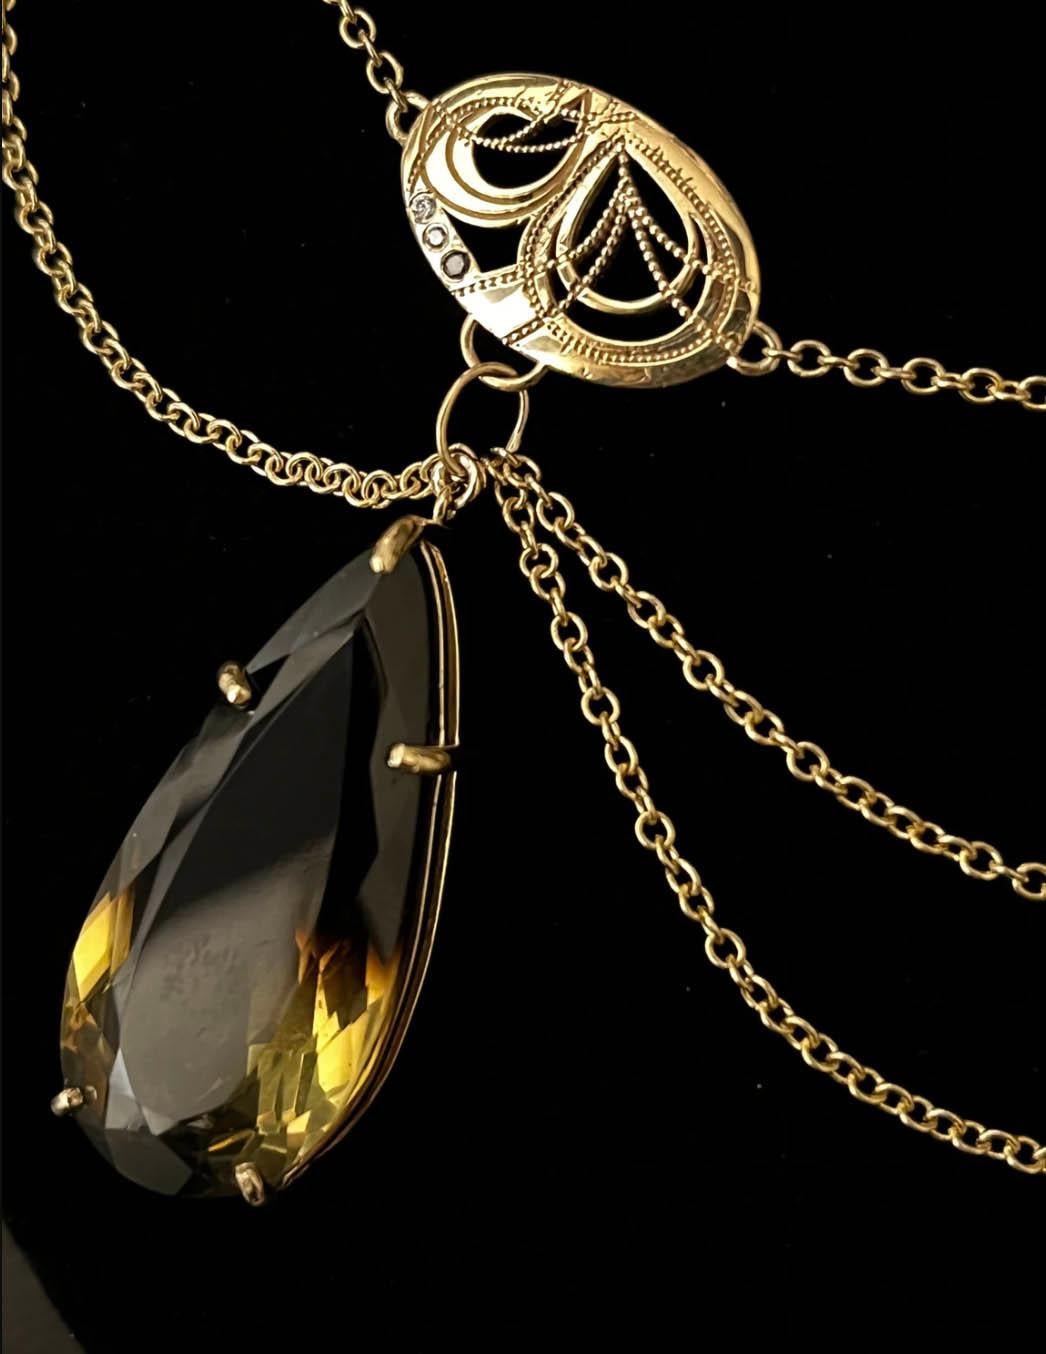 ASTRA 
OUR ASPIRATIONS WILL TAKE US TO THE STARS
A custom cut 35.5 carat pear citrine is suspended from strands of shimmering gold chain and hand engraved celestial pendants. Cascades of black, white, and champagne diamonds sparkle throughout this